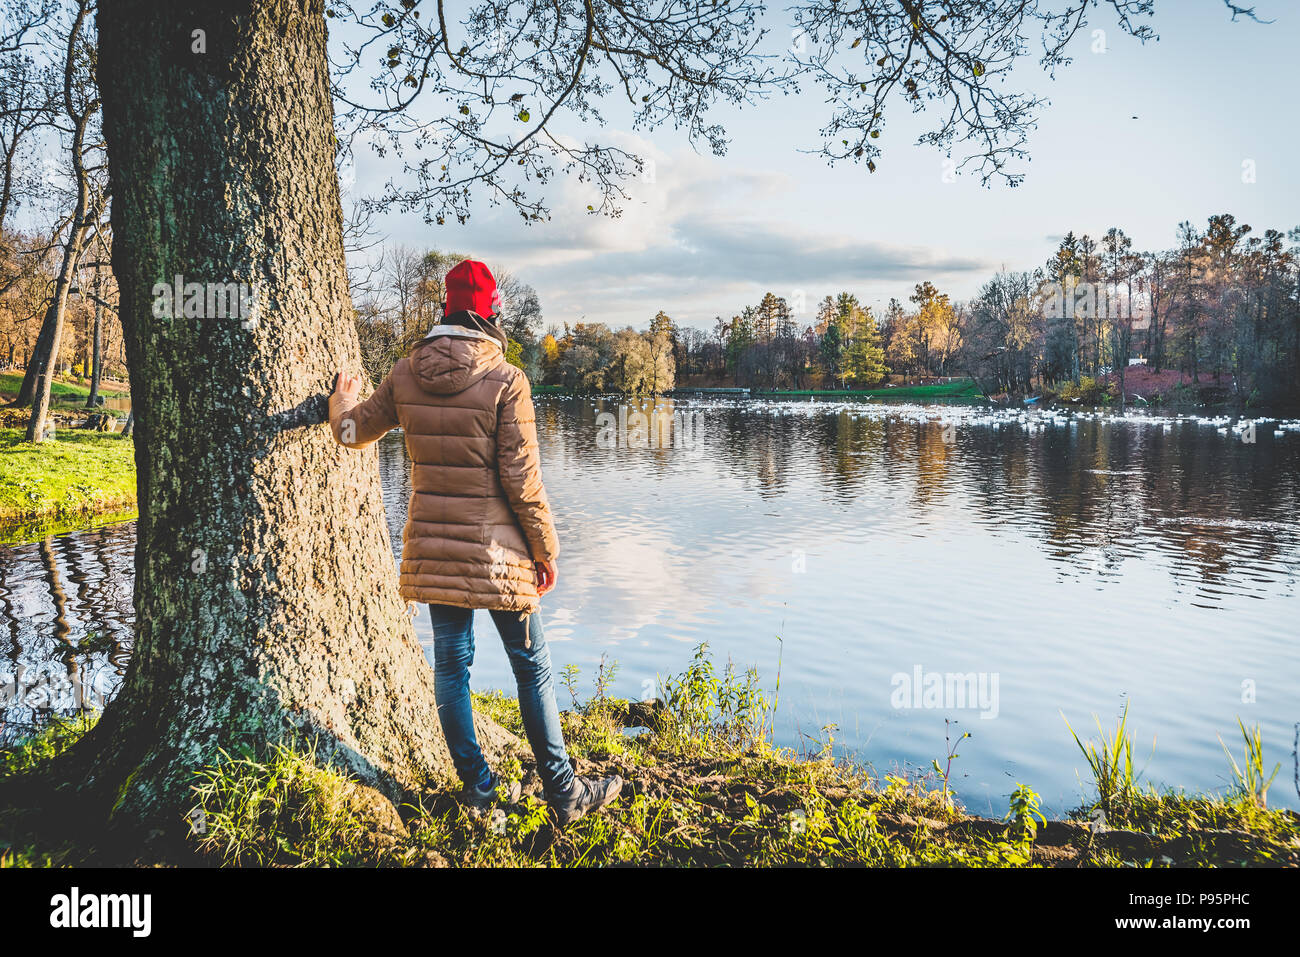 girl in a red hat wearing headphones enjoys the view of an autumn park Stock Photo